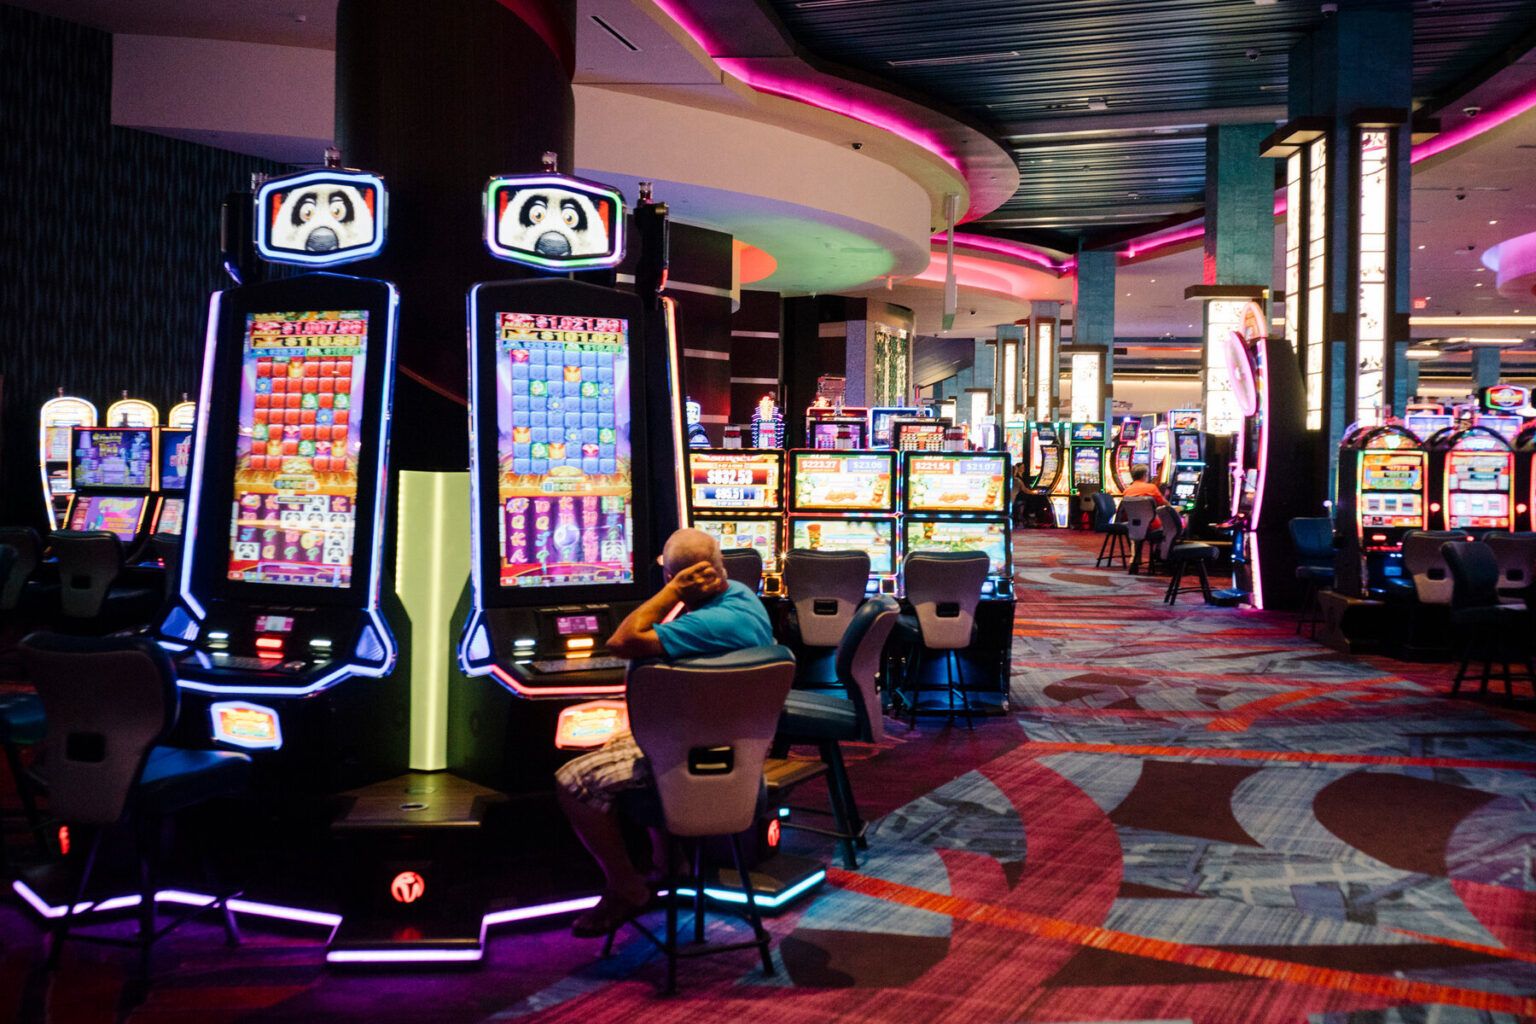 Are you a huge fan of gambling in casinos? Here are the coolest casino scenes in cinema ranked from highest to lowest!